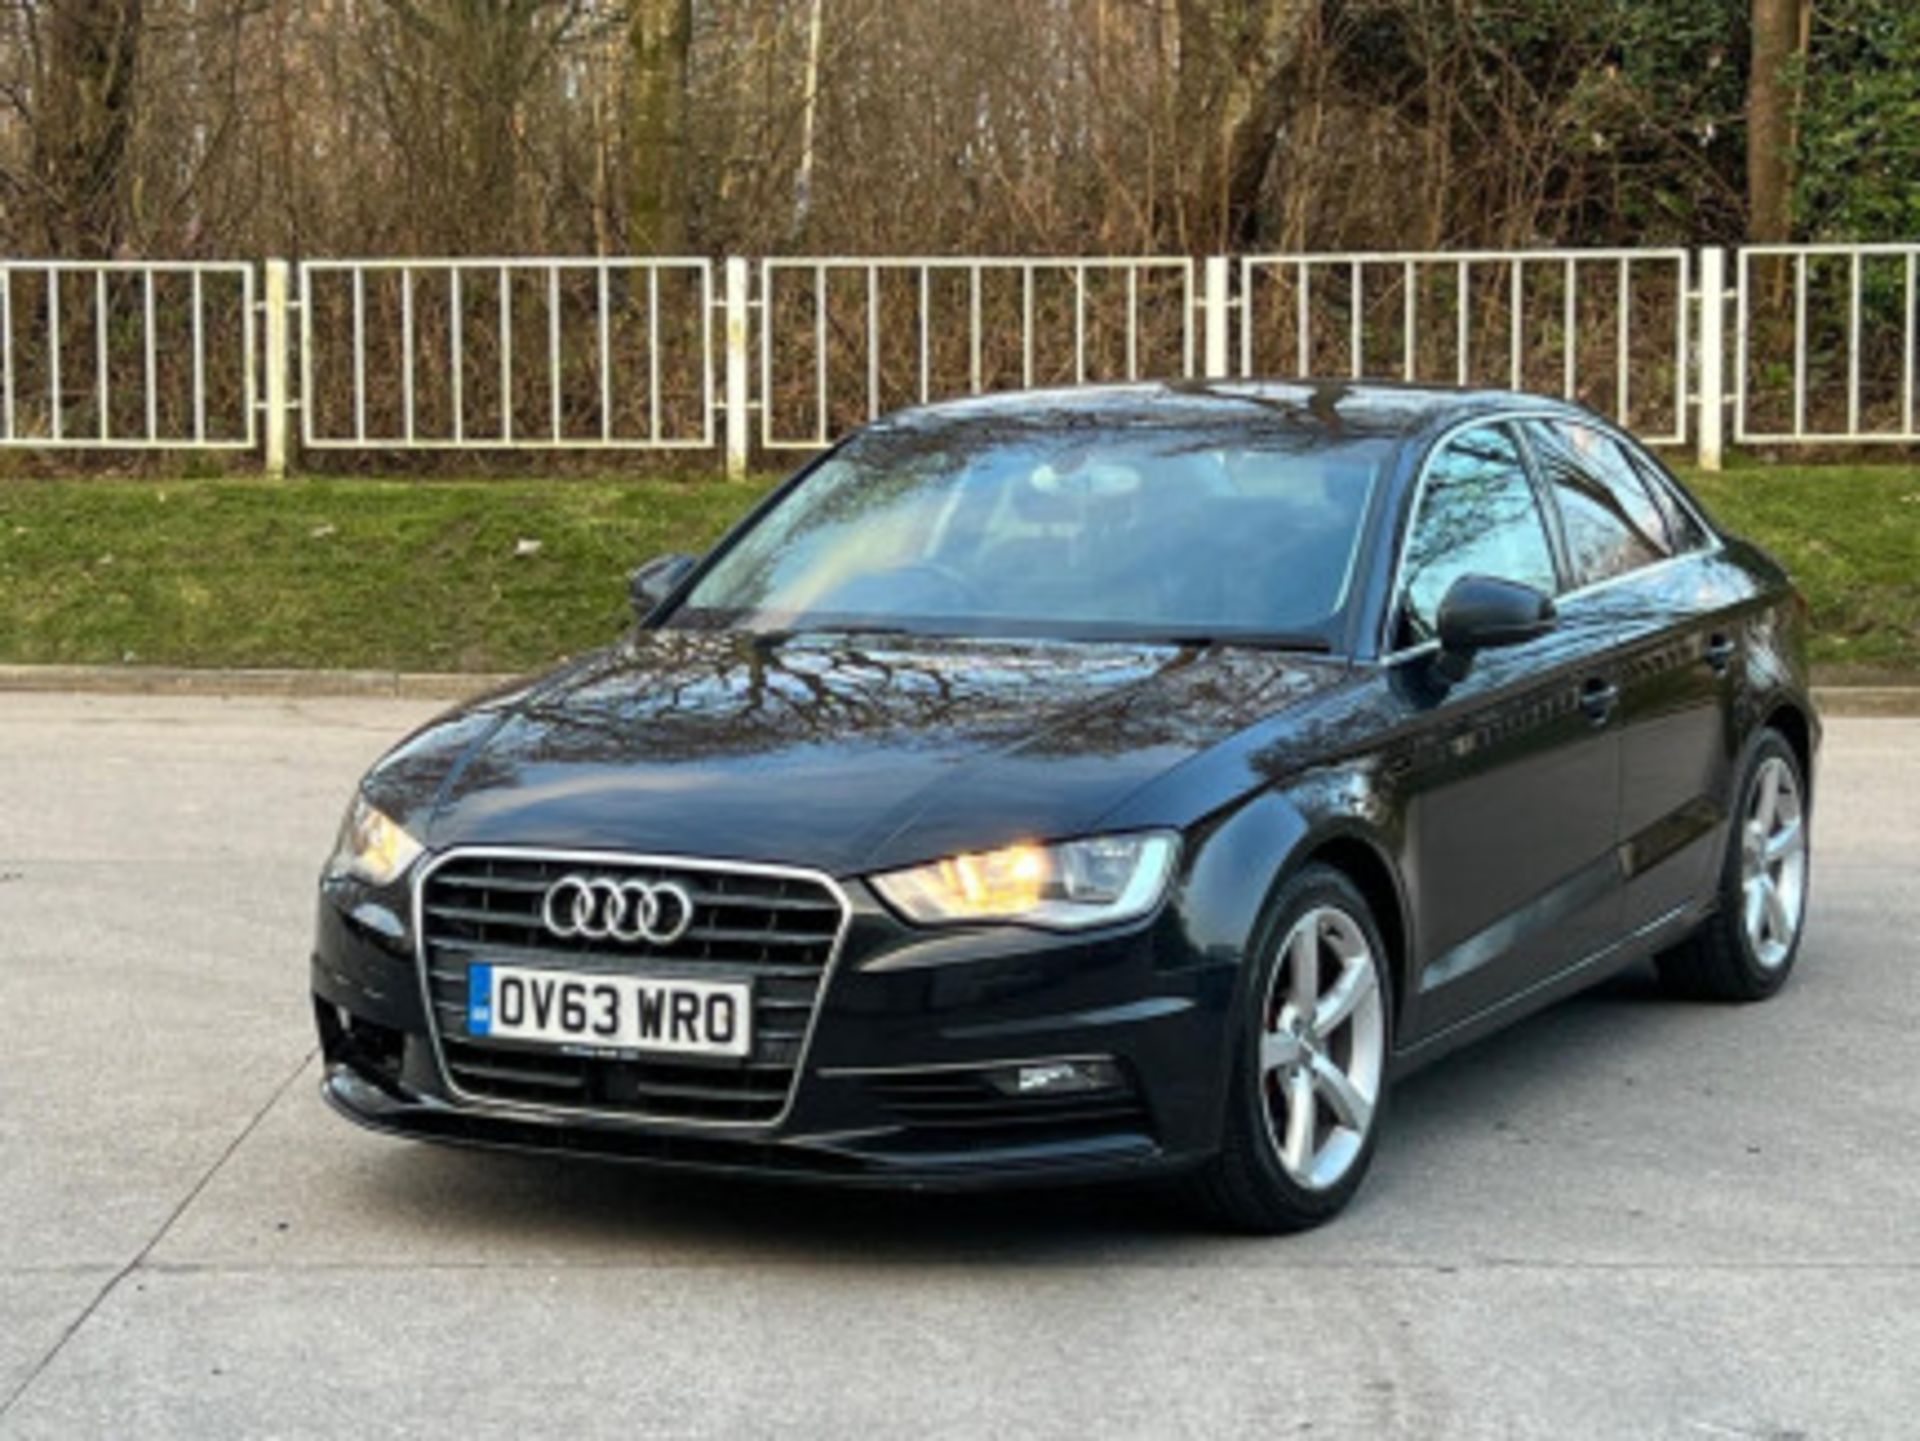 AUDI A3 2.0TDI SPORTBACK - STYLE, PERFORMANCE, AND COMFORT COMBINED >>--NO VAT ON HAMMER--<<